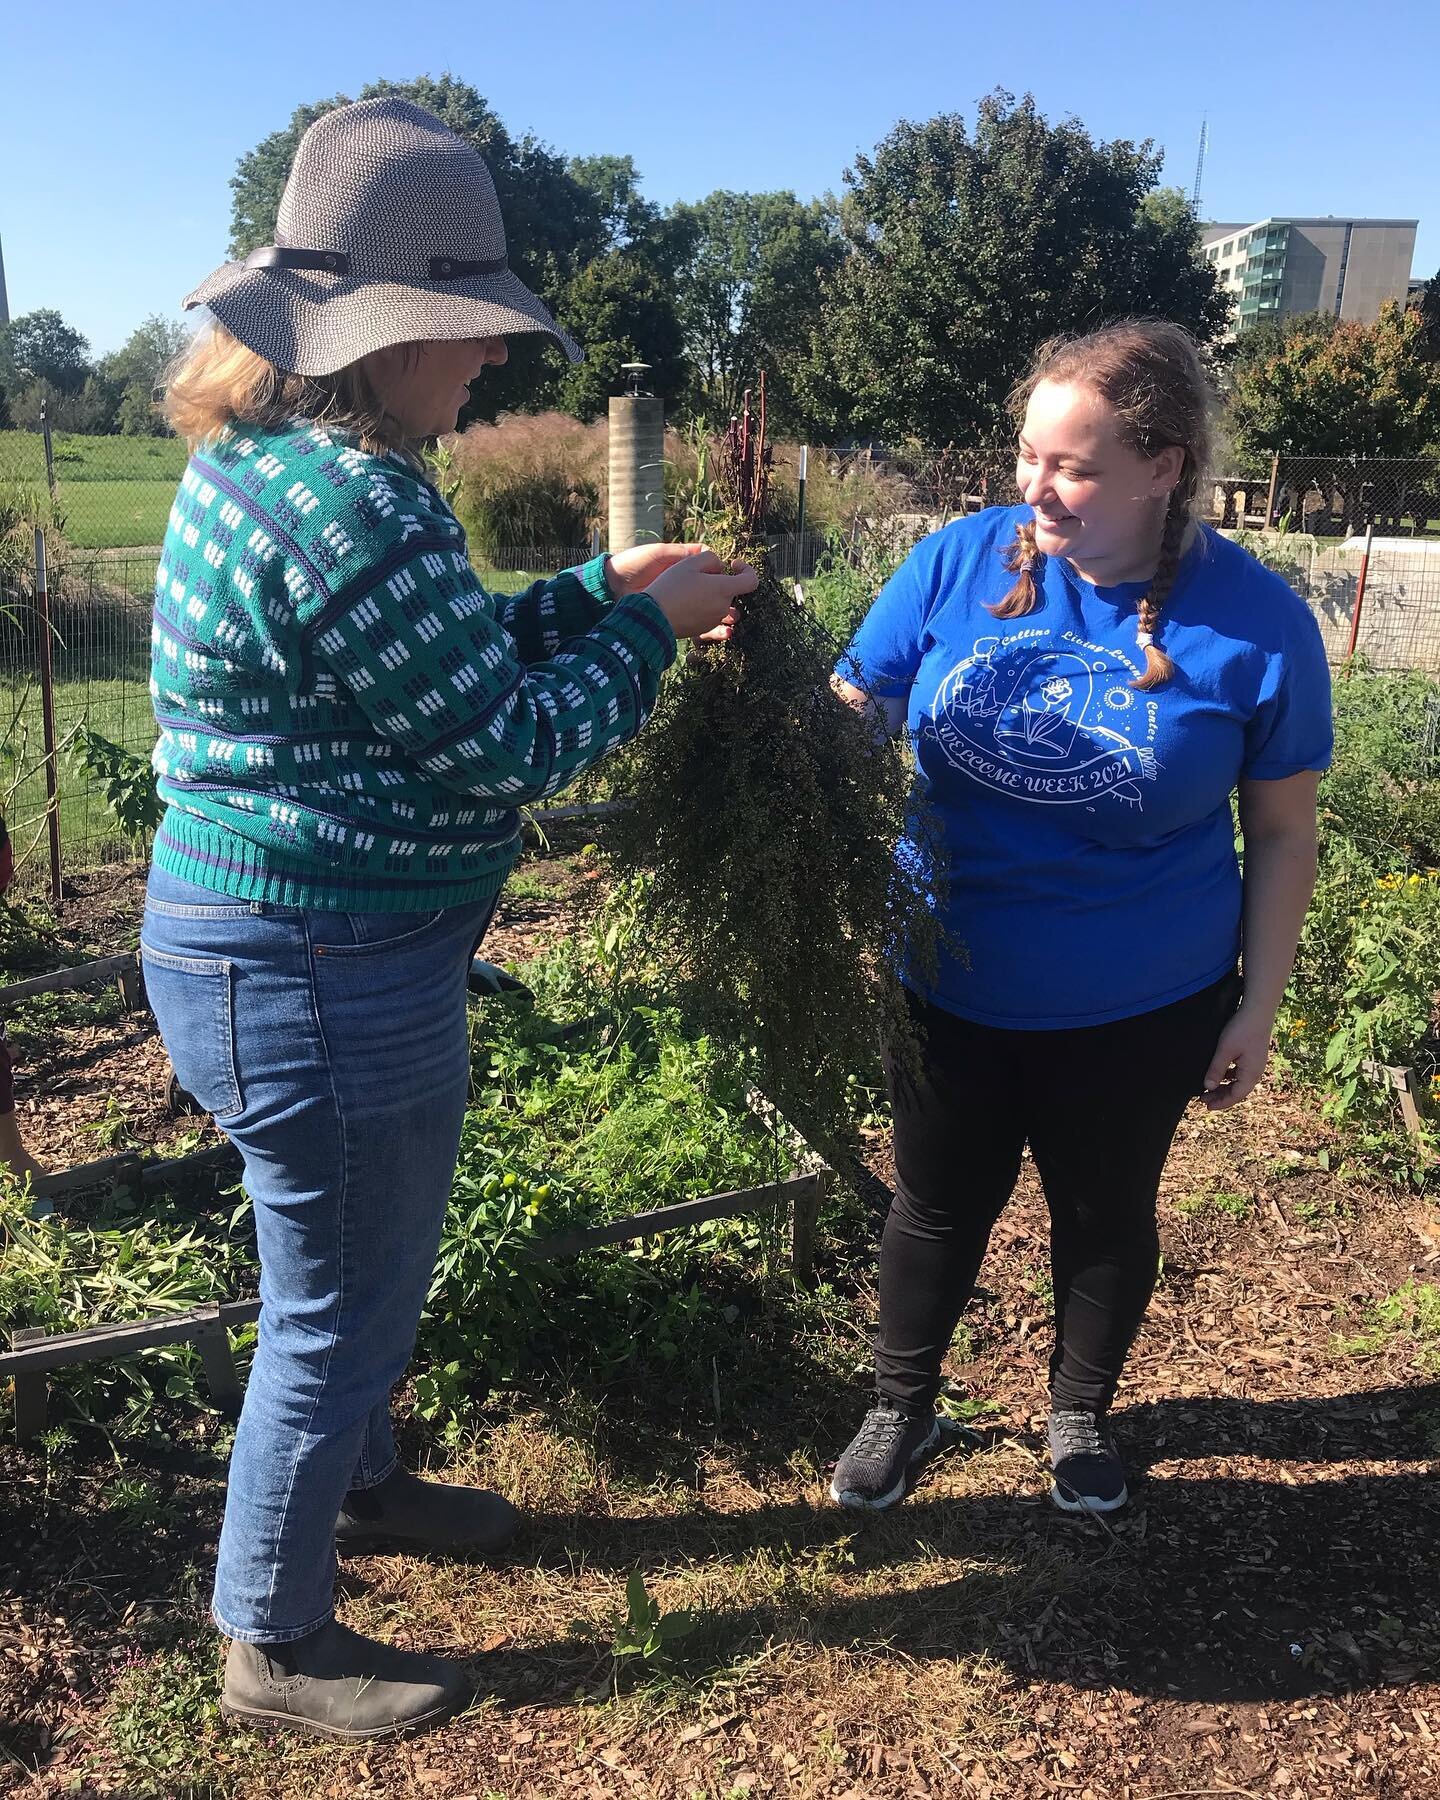 We had some visitors from @collins_llc drop by this Saturday to help bundle up more tulsi, dry birdhouse gourds and enjoy a beautifully sunny fall day. Thank you for sharing the space with us!!!